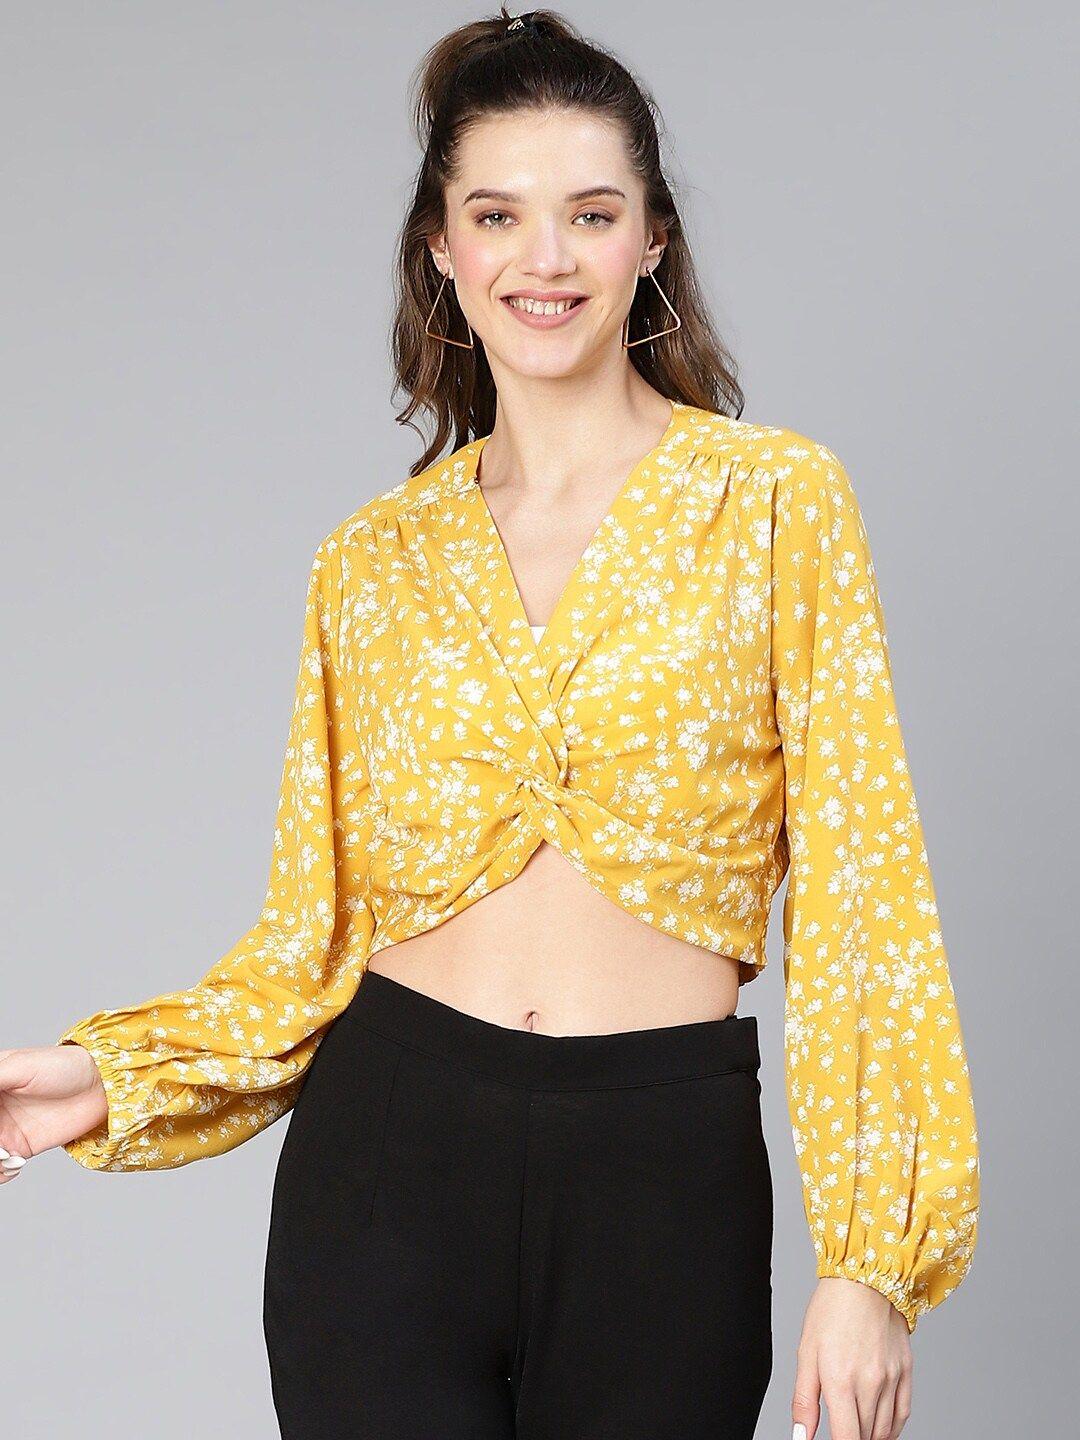 oxolloxo floral printed knotted crop top